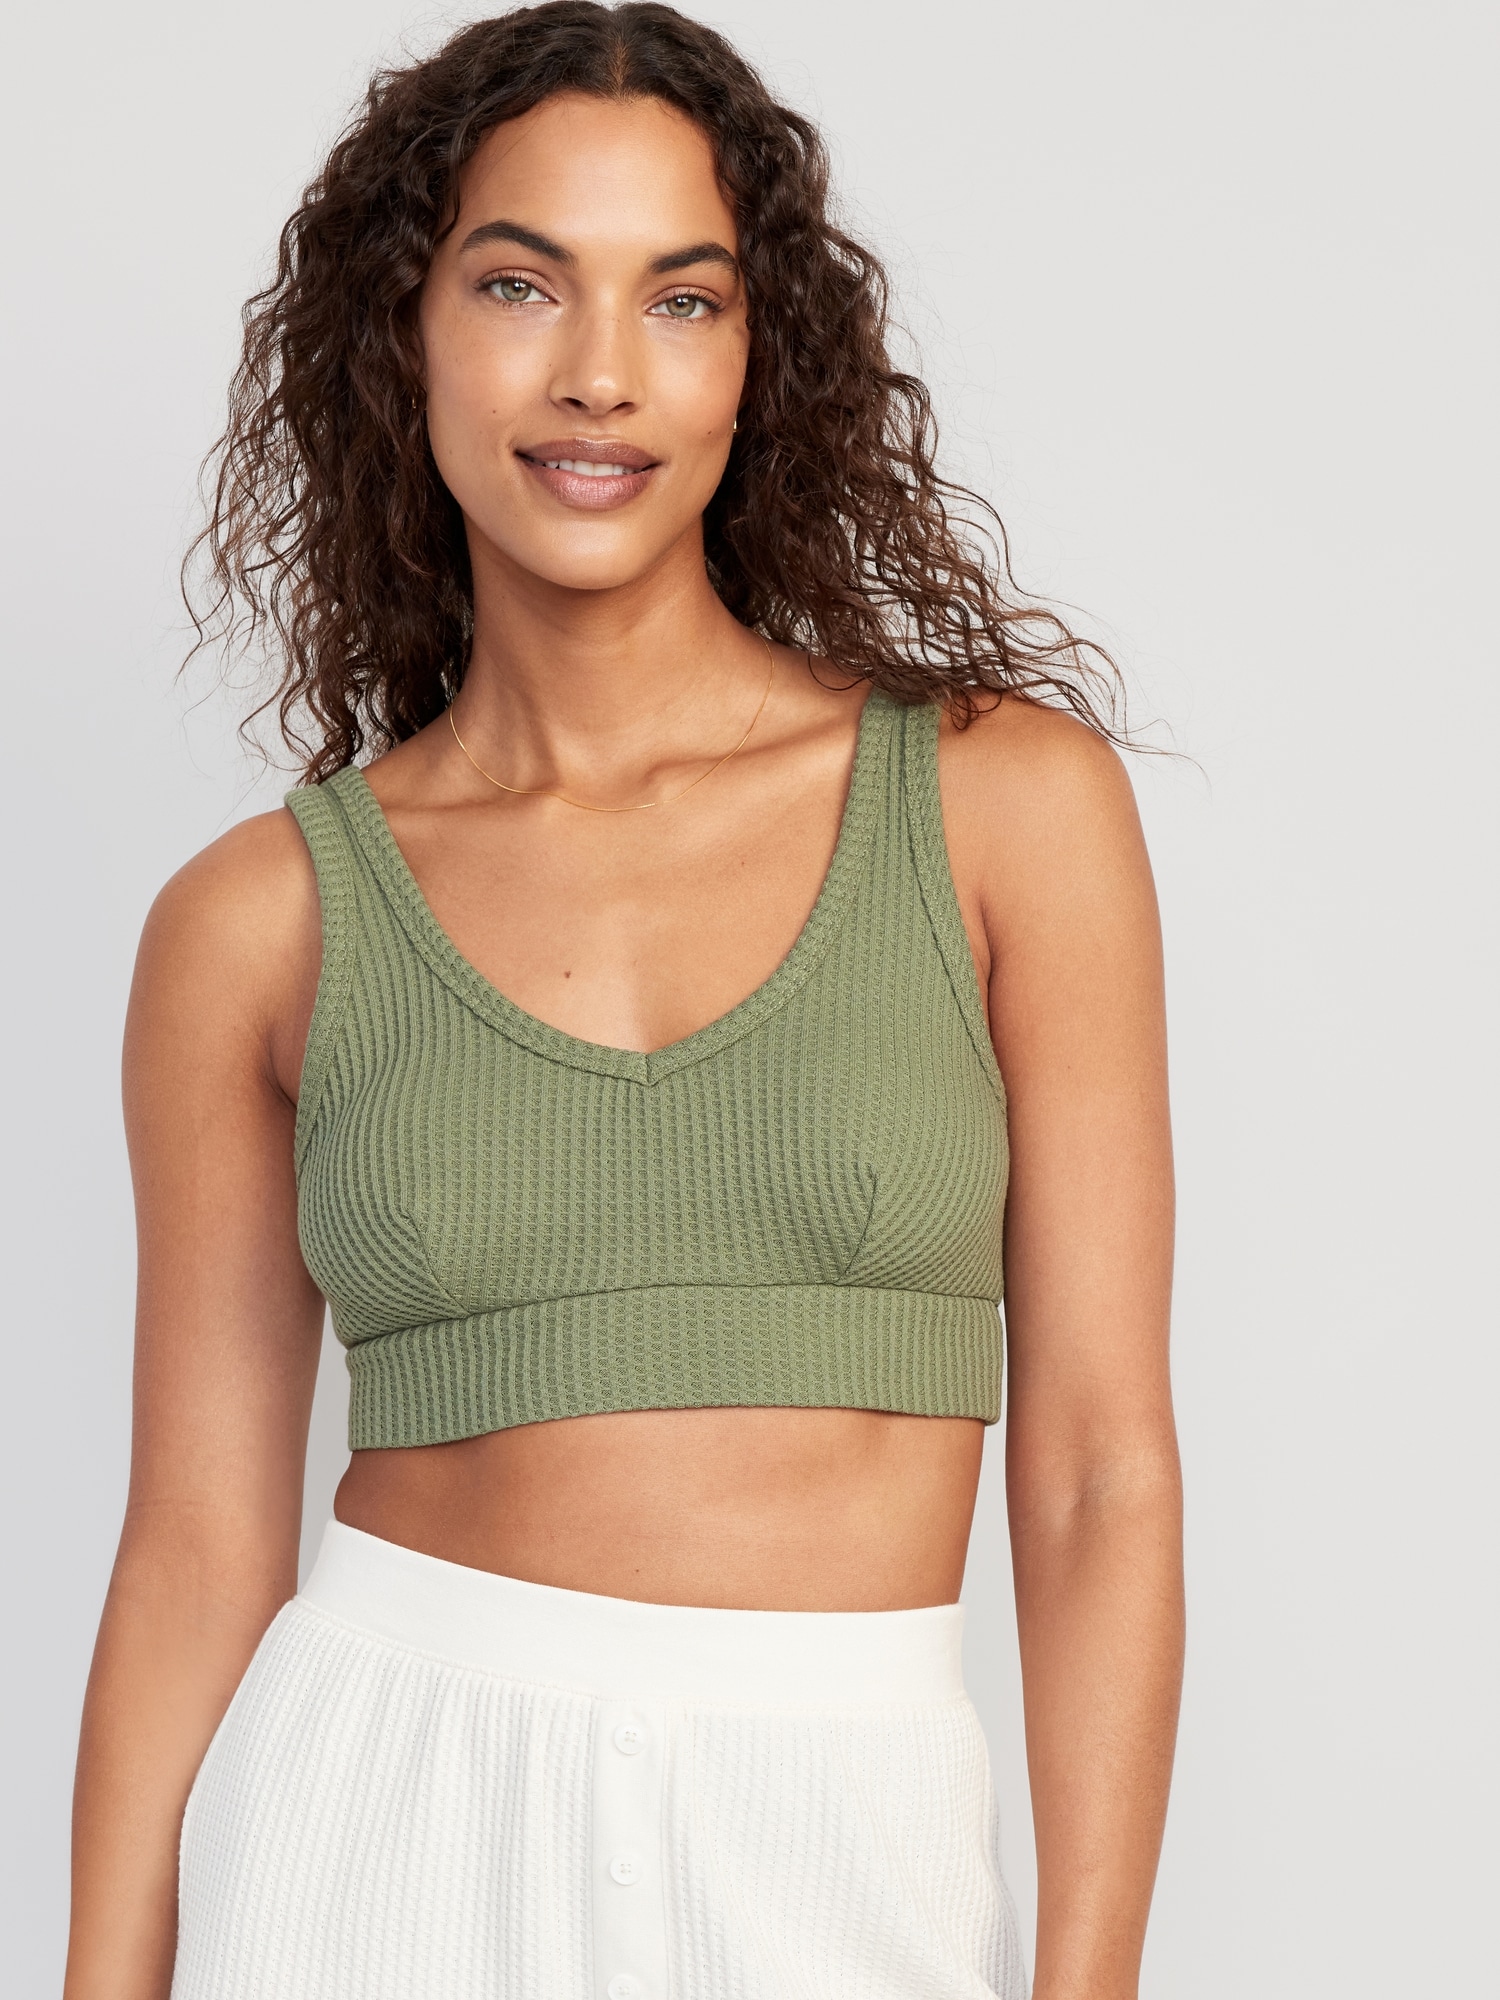 Tube Top Cotton Span Plain Solid Basic Layering No Built-in Bra S-XL  5colors